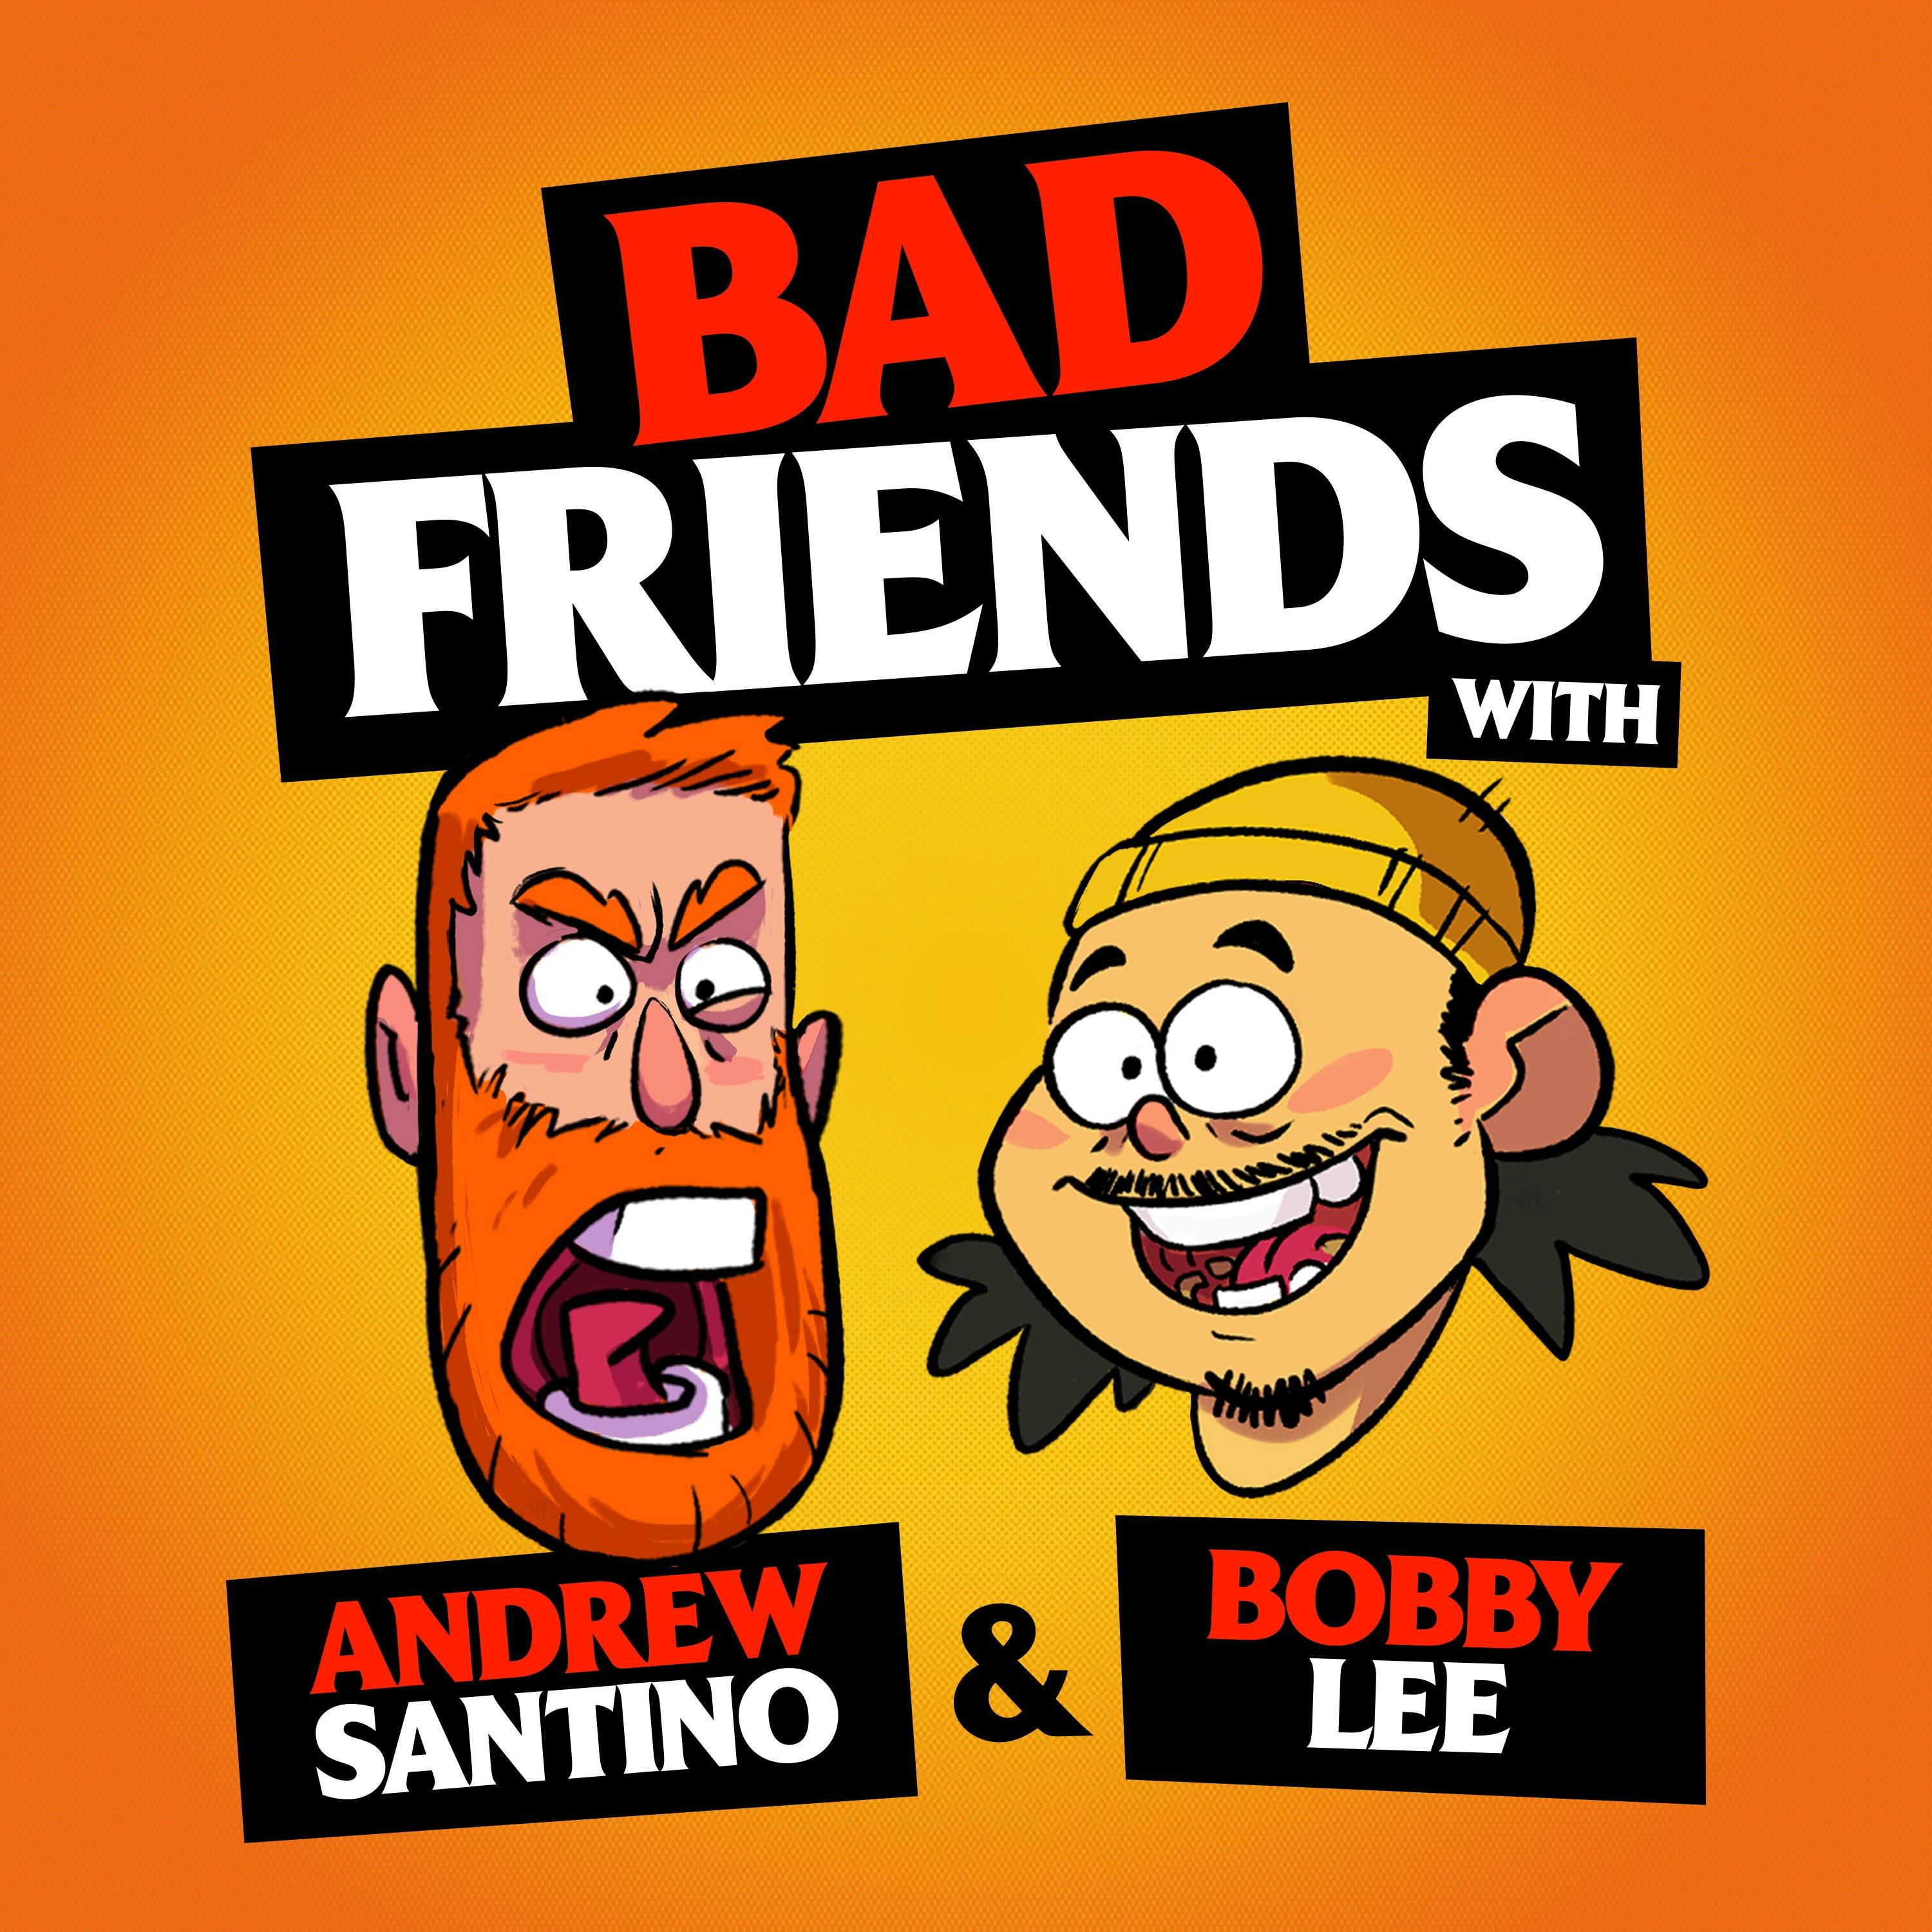 Immortal Kombat by Andrew Santino and Bobby Lee